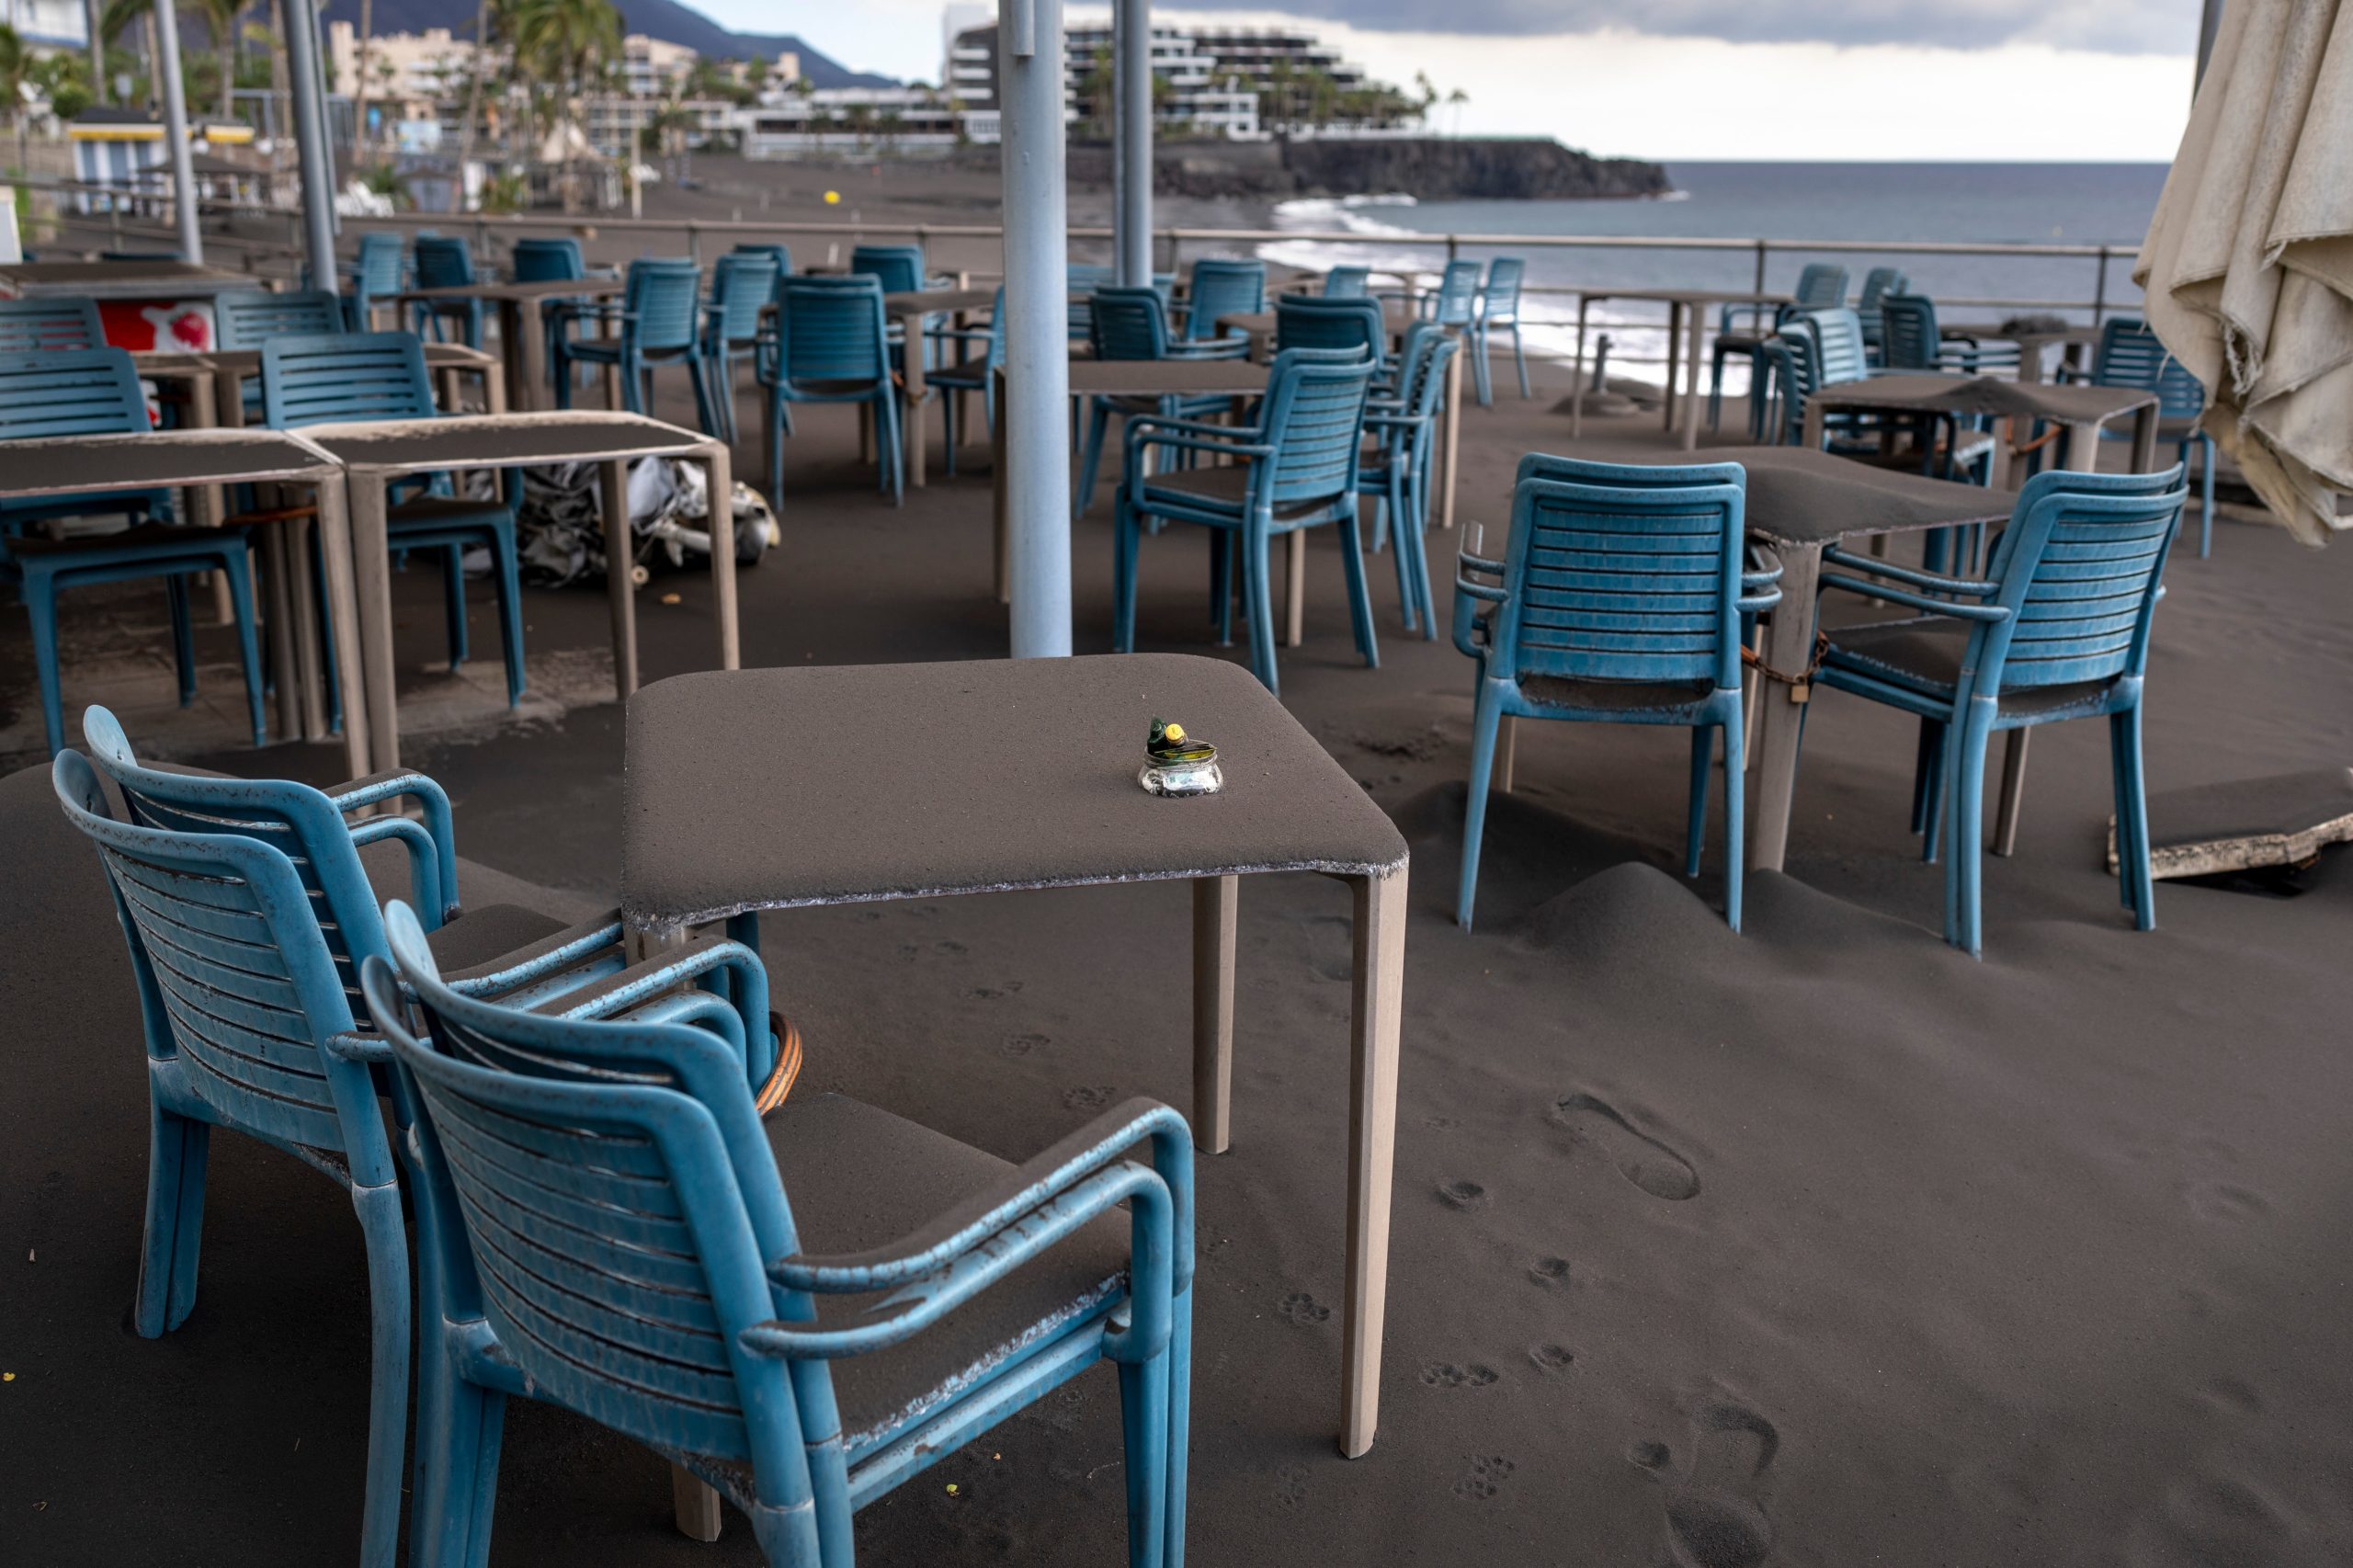 Ash covers tables and chairs on a bar terrace at the promenade of Puerto Naos village. (Photo: Emilio Morenatti, AP)